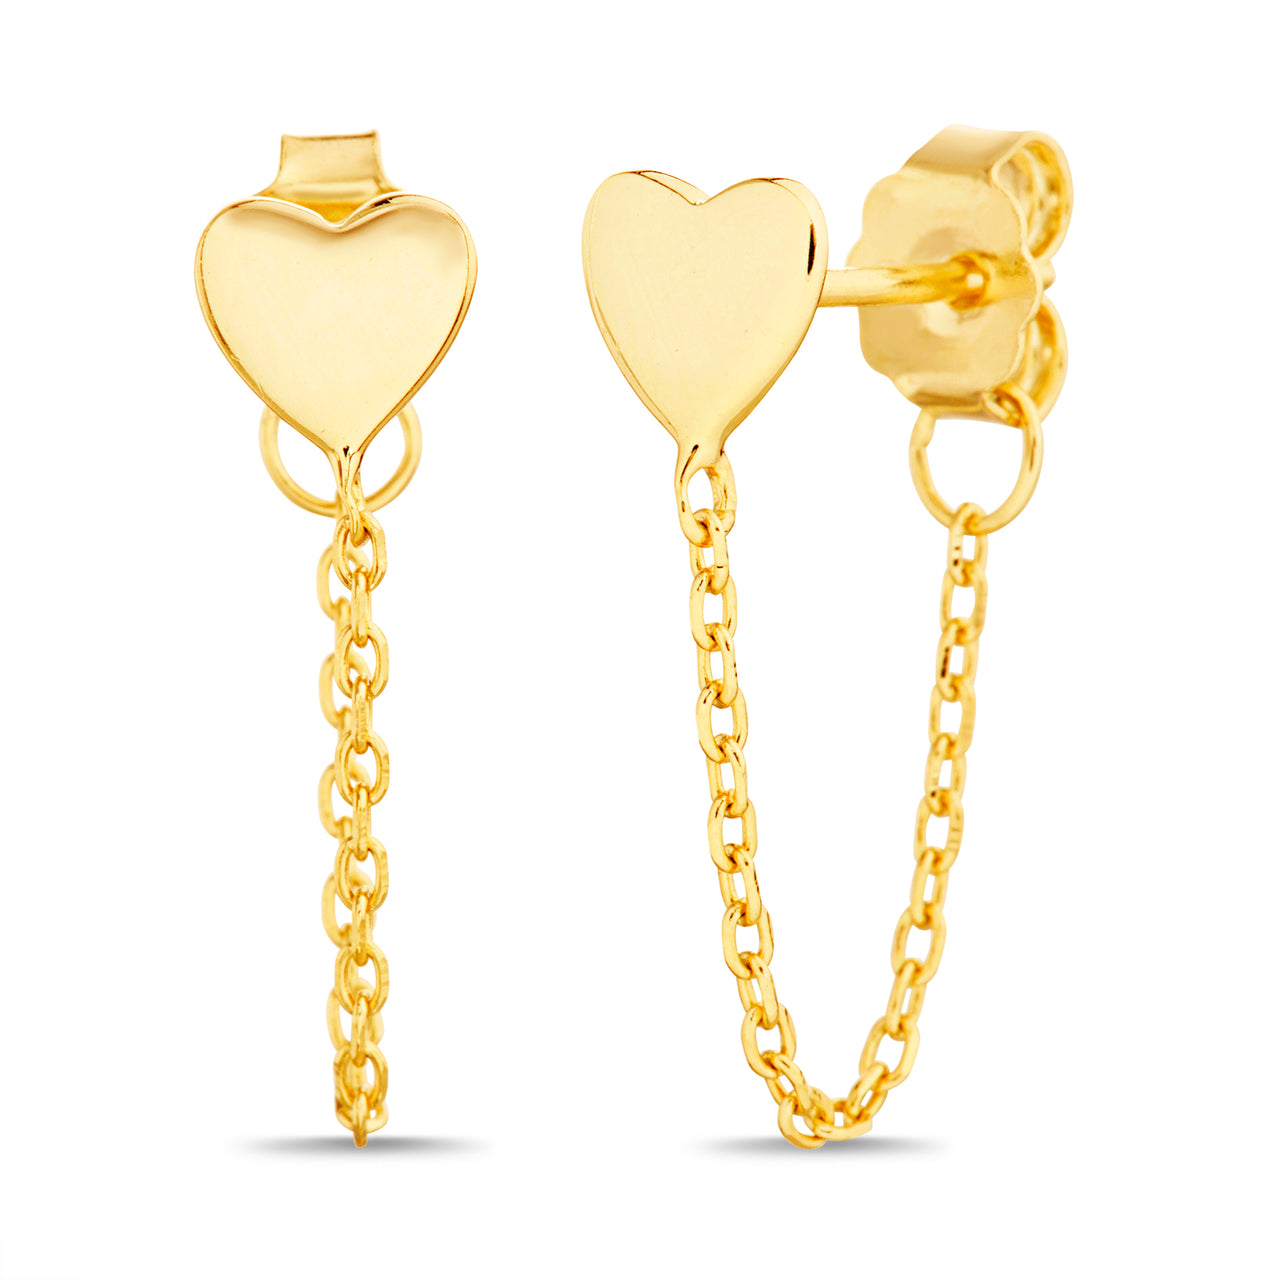 Lesa Michele Heart Post Chain Front to Back Earrings in Yellow Gold Plated Sterling Silver